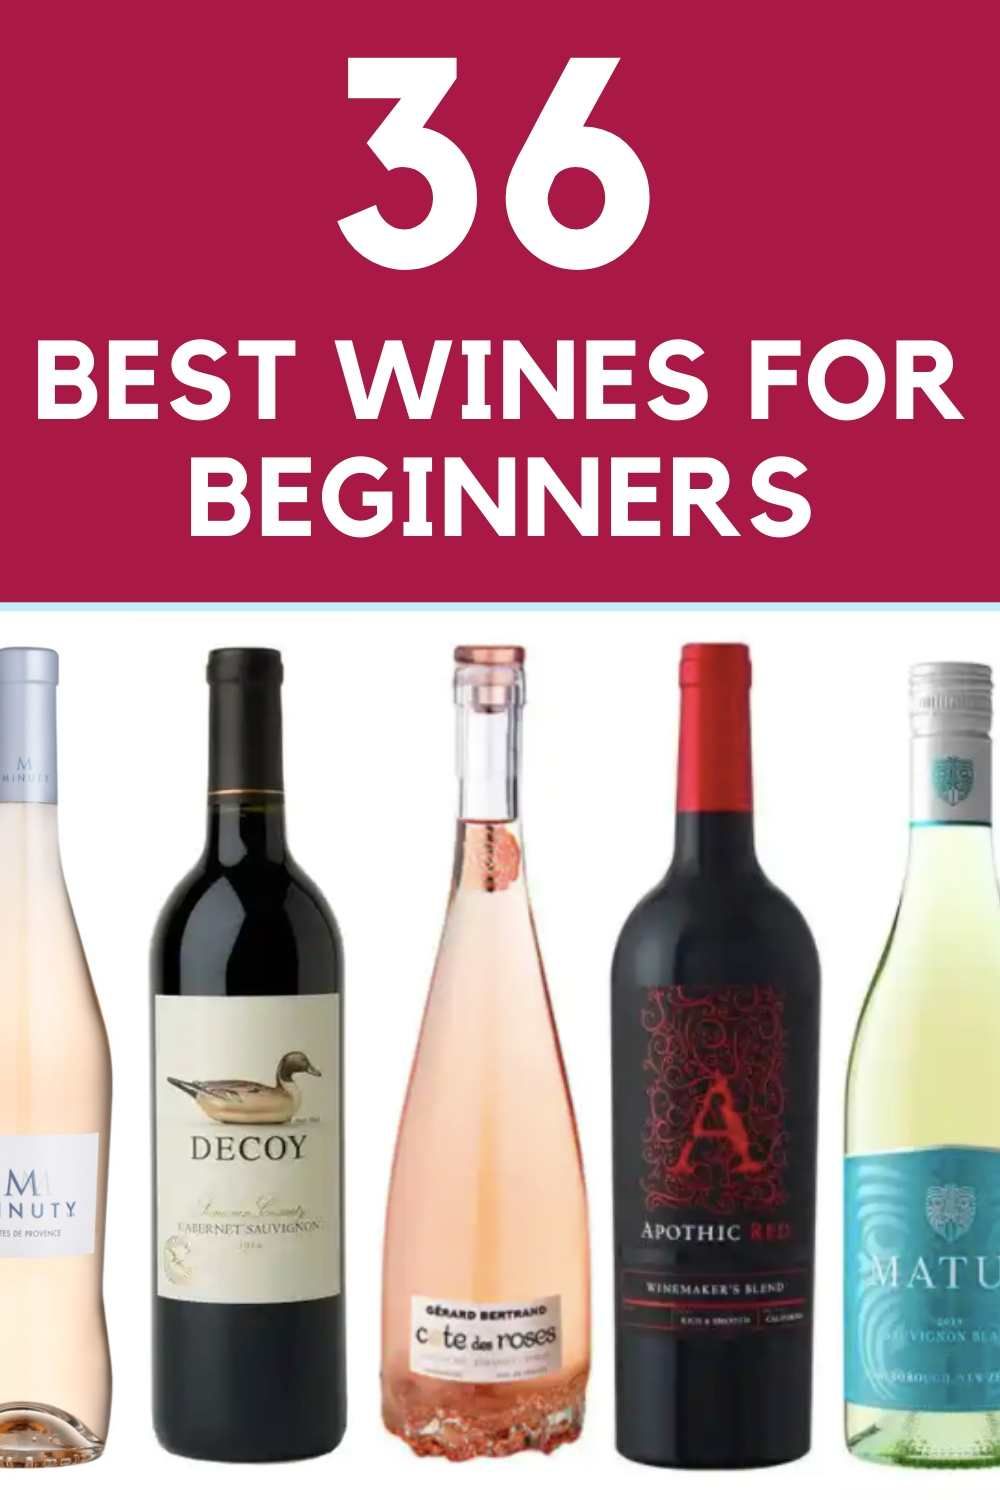 Best Wines for Beginners